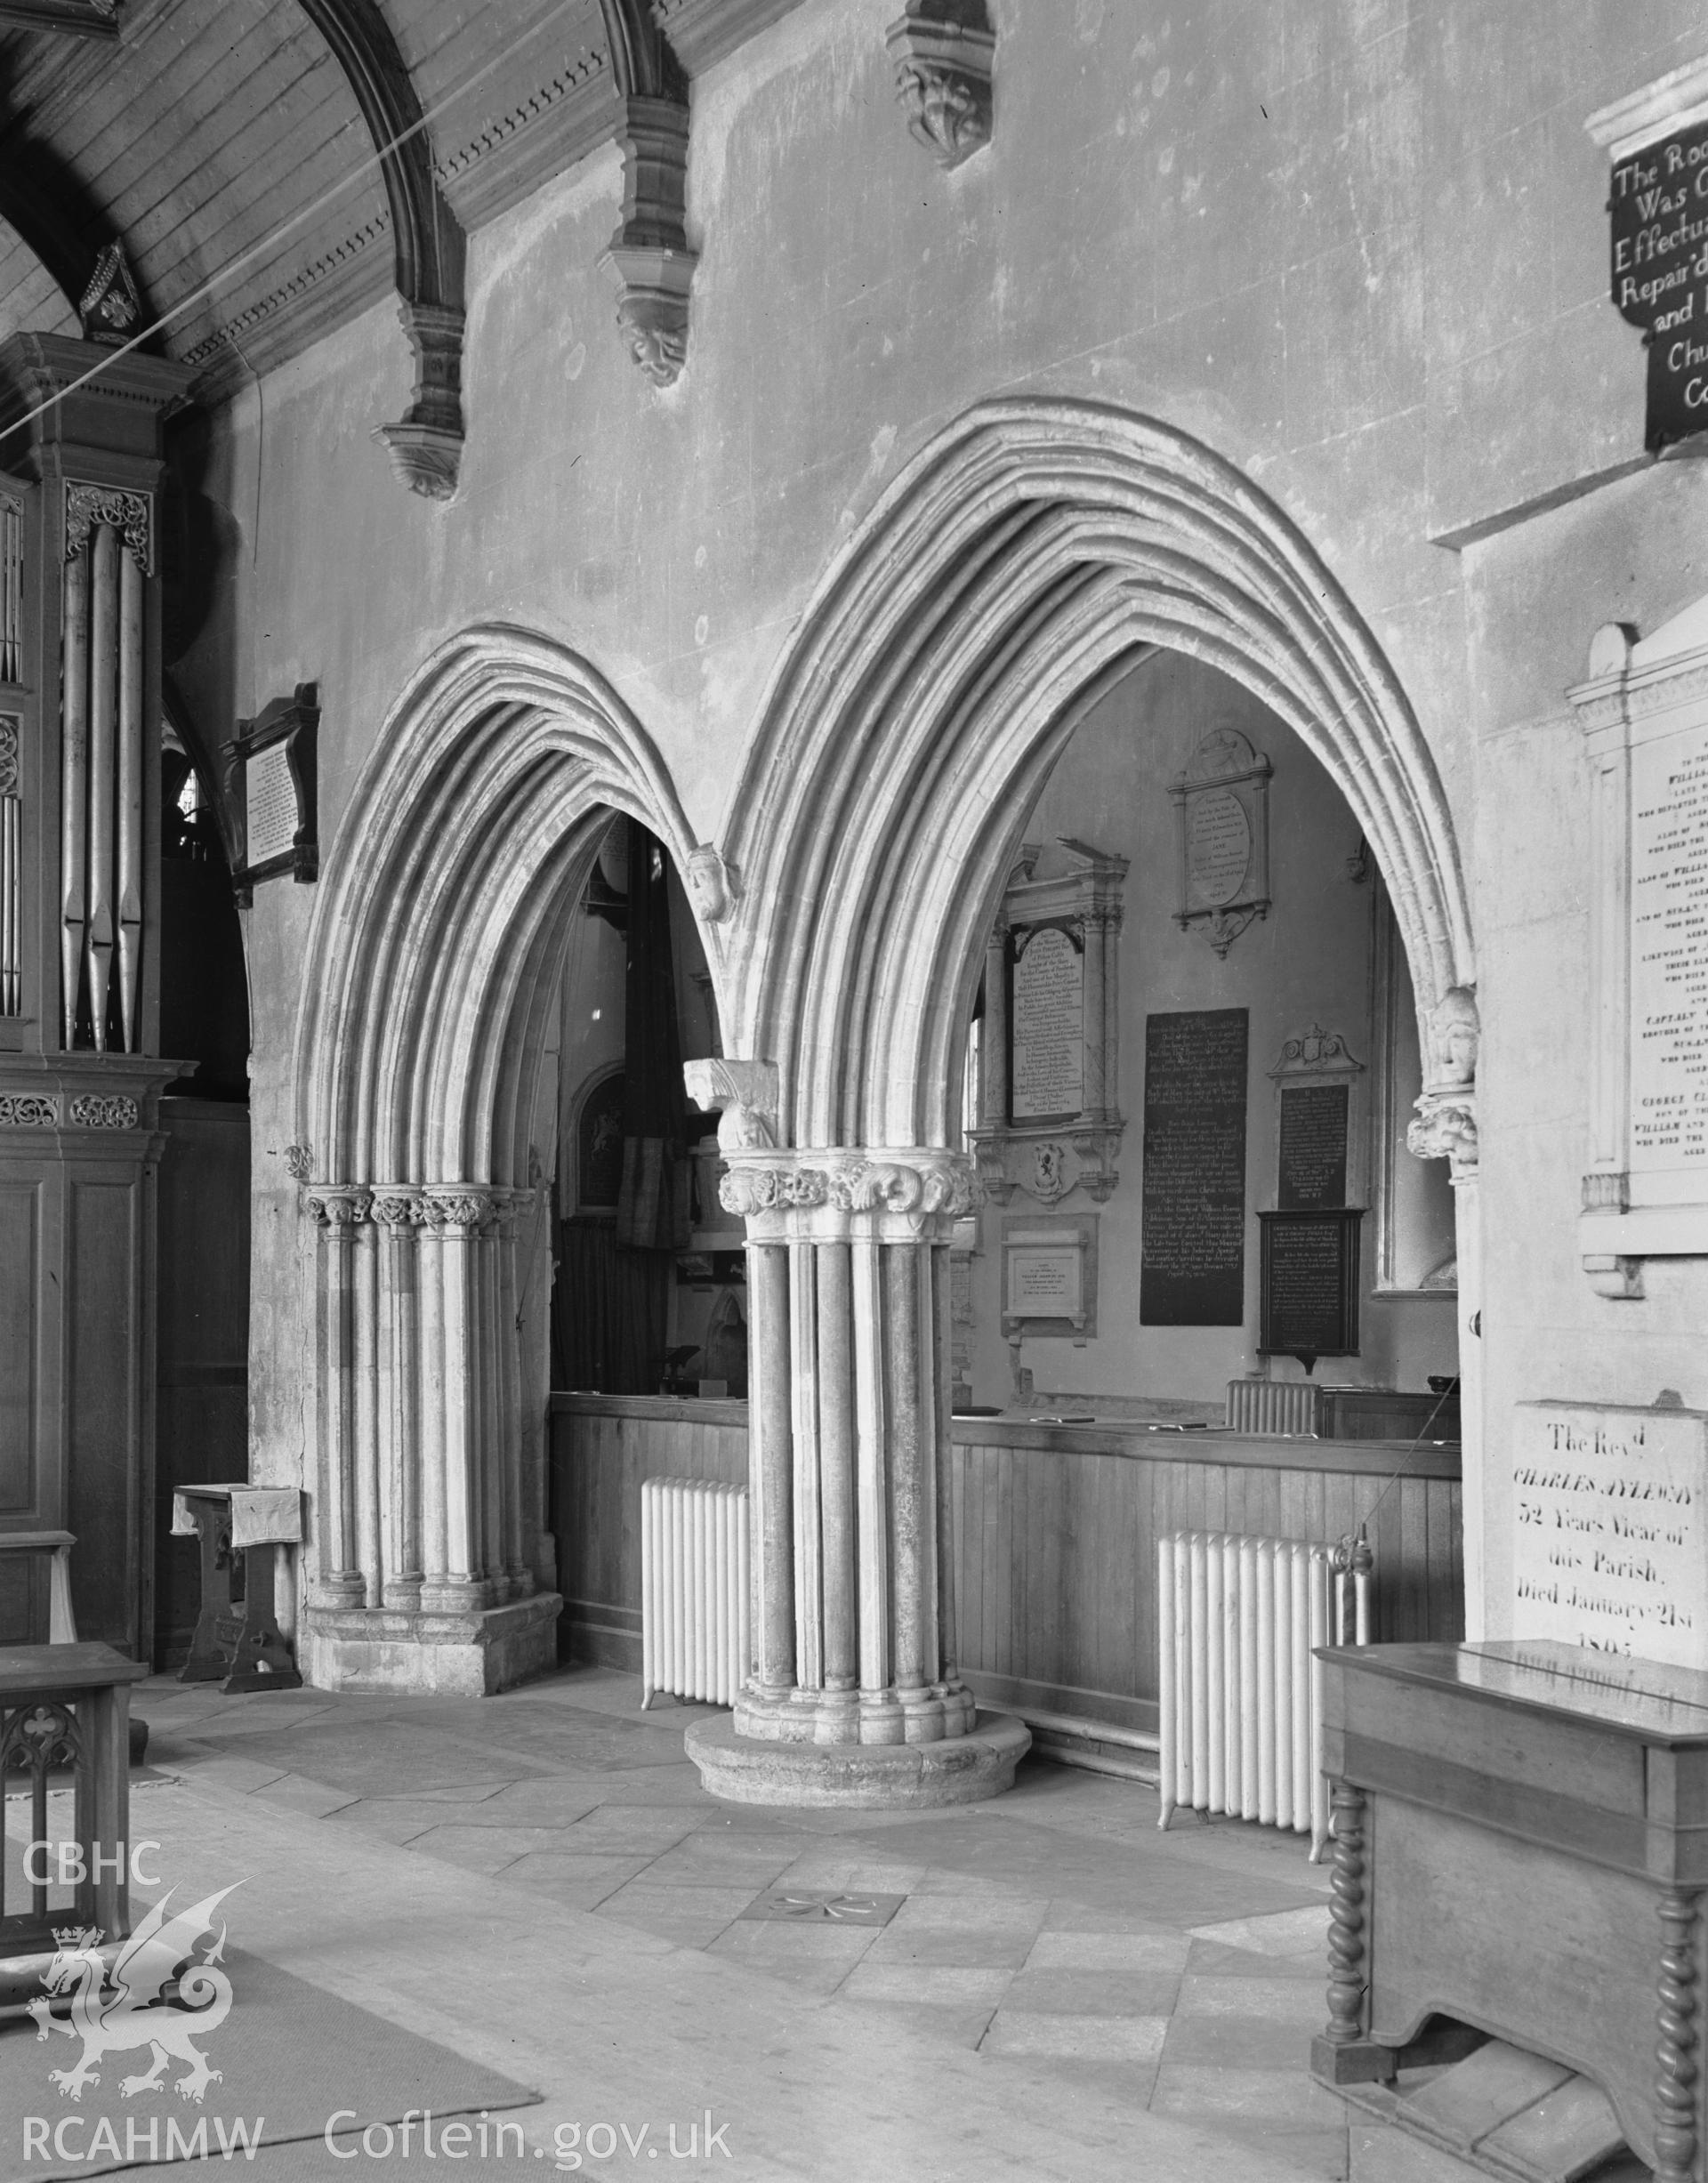 Interior view of the chancel arcade from the north aisle.